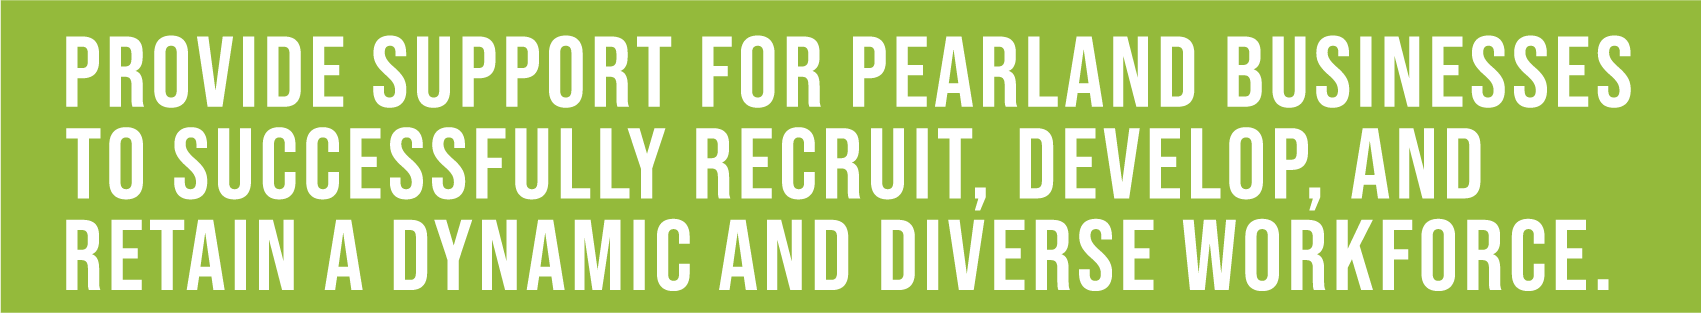 provide support for pearland businesses to successfully recruit, develop, and retain a dynamic and diverse workforce